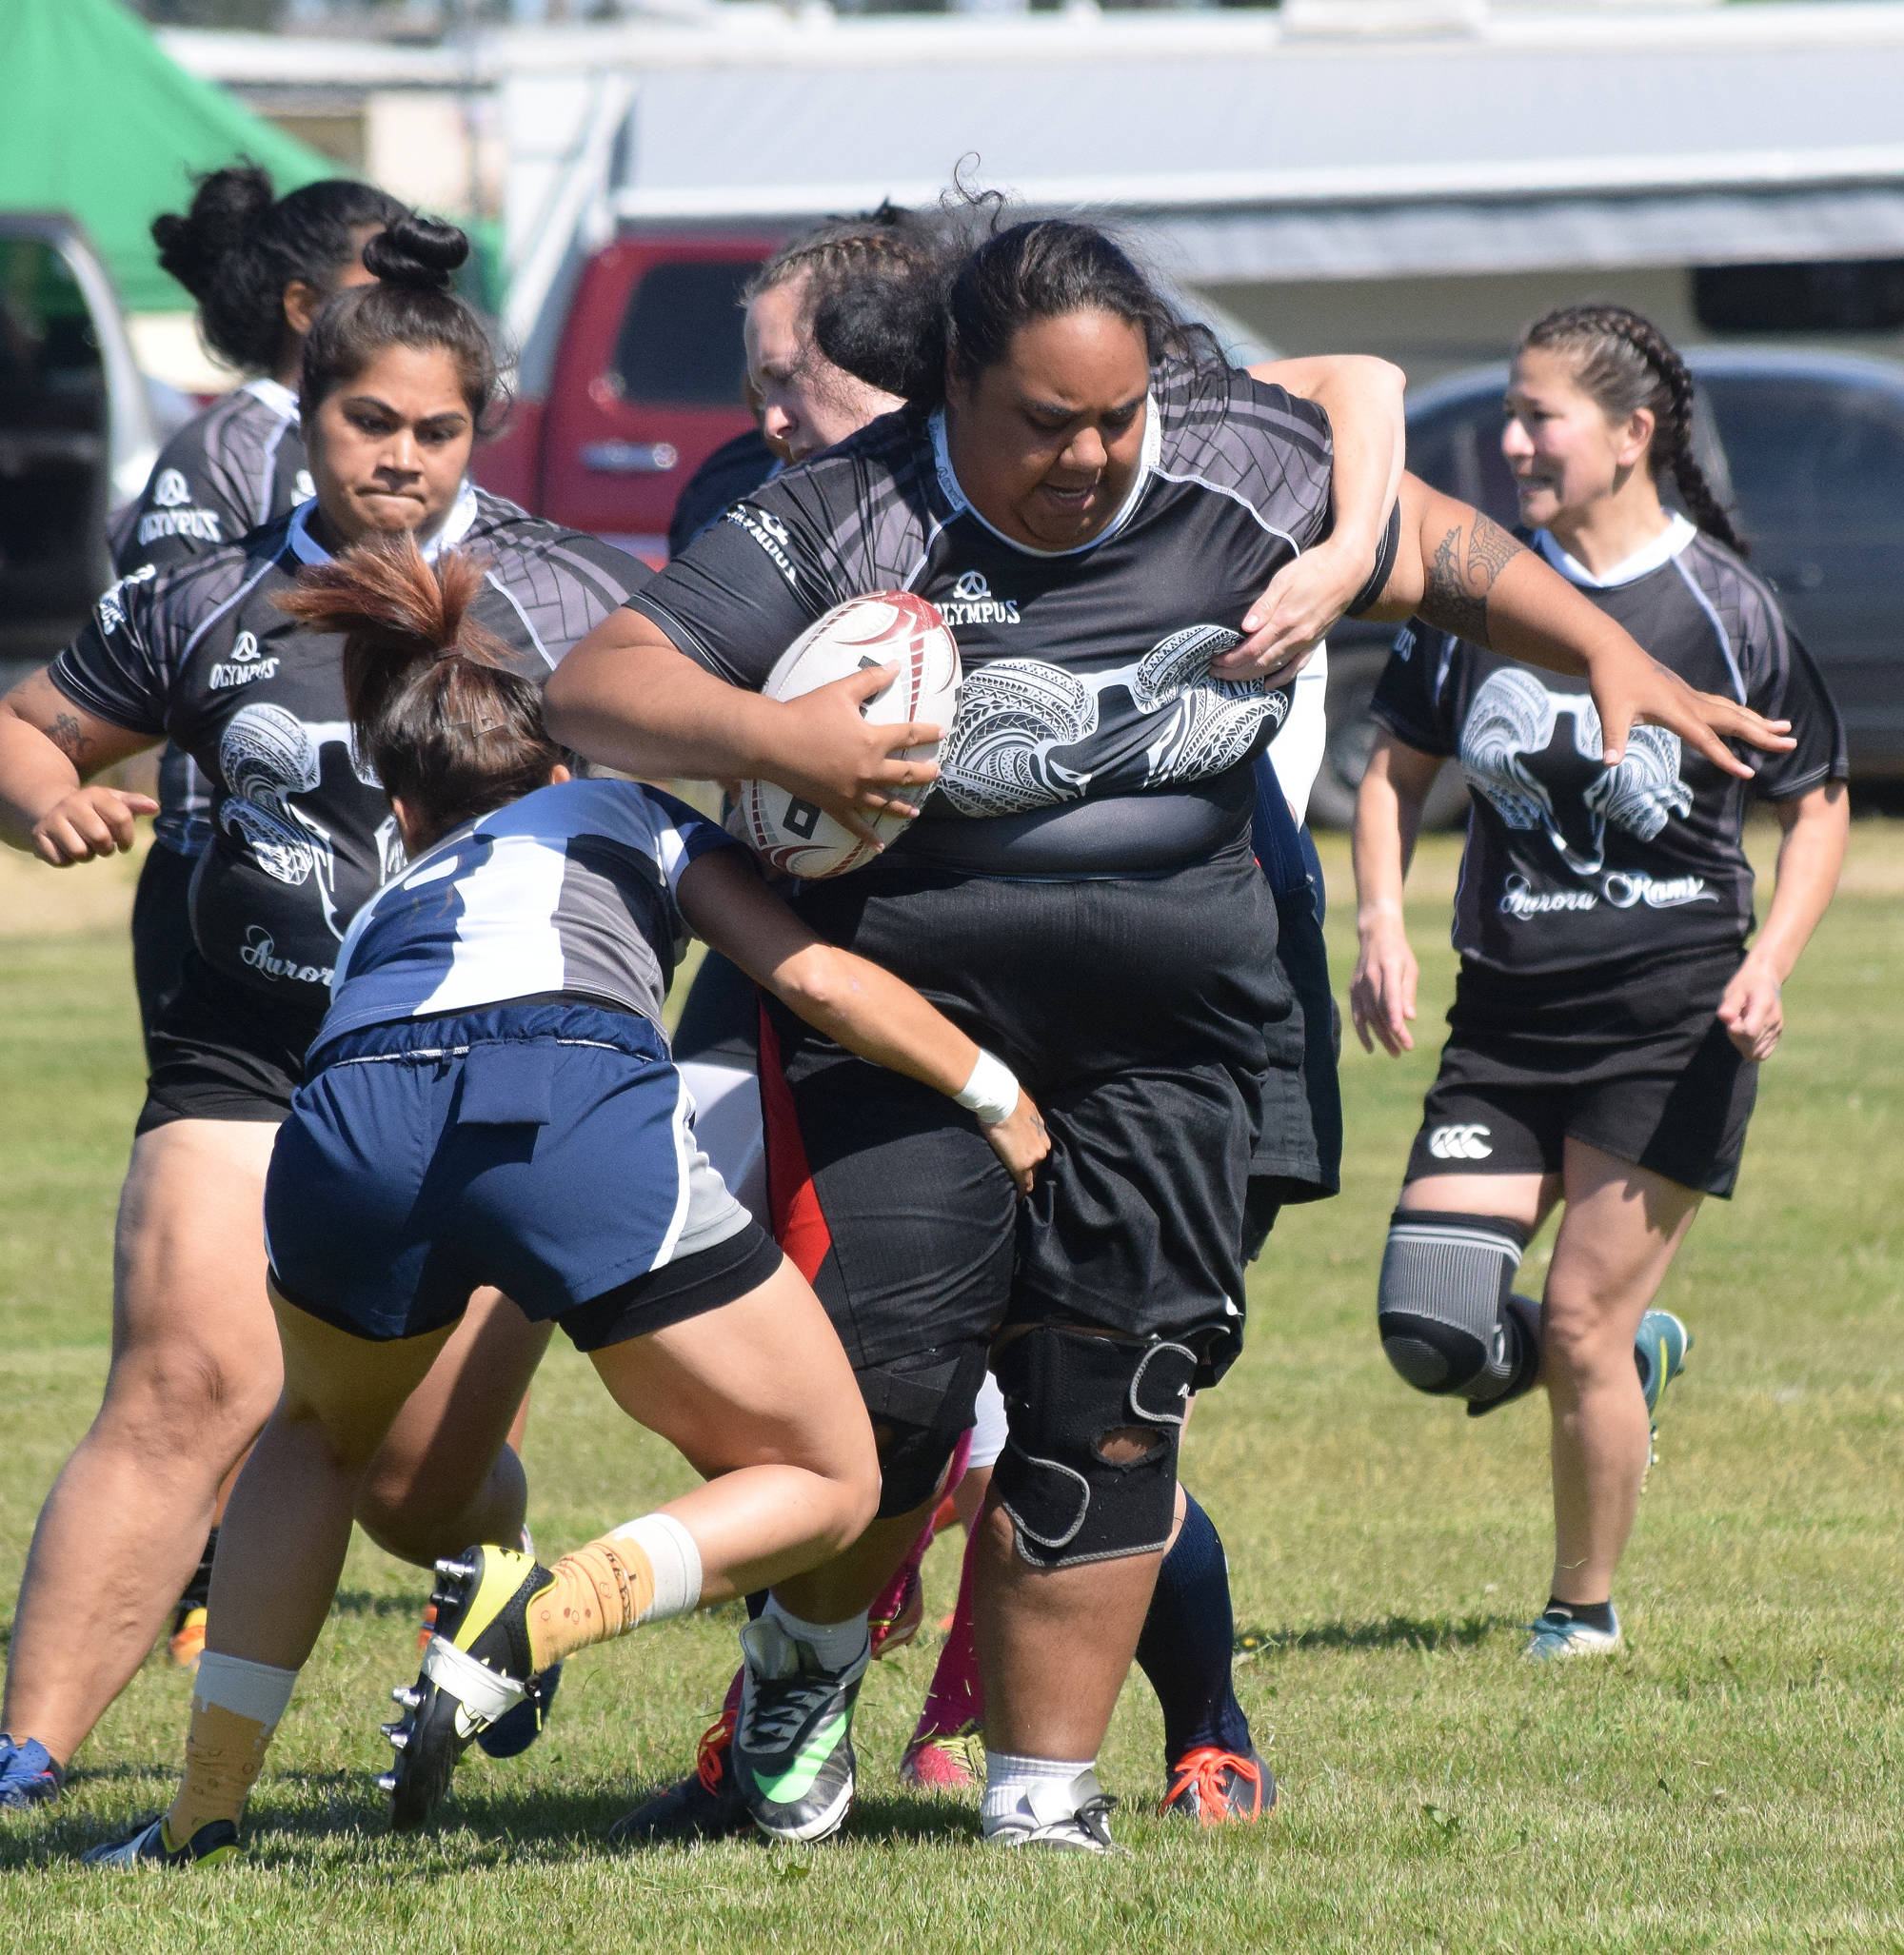 Aurora Rams player Tupe A’asa (with ball) tries to shed tackles from Anchortown players Saturday at the Between the Tides Dipfest Rugby 10’s tournament at Spur View field in Kenai. (Photo by Joey Klecka/Peninsula Clarion)